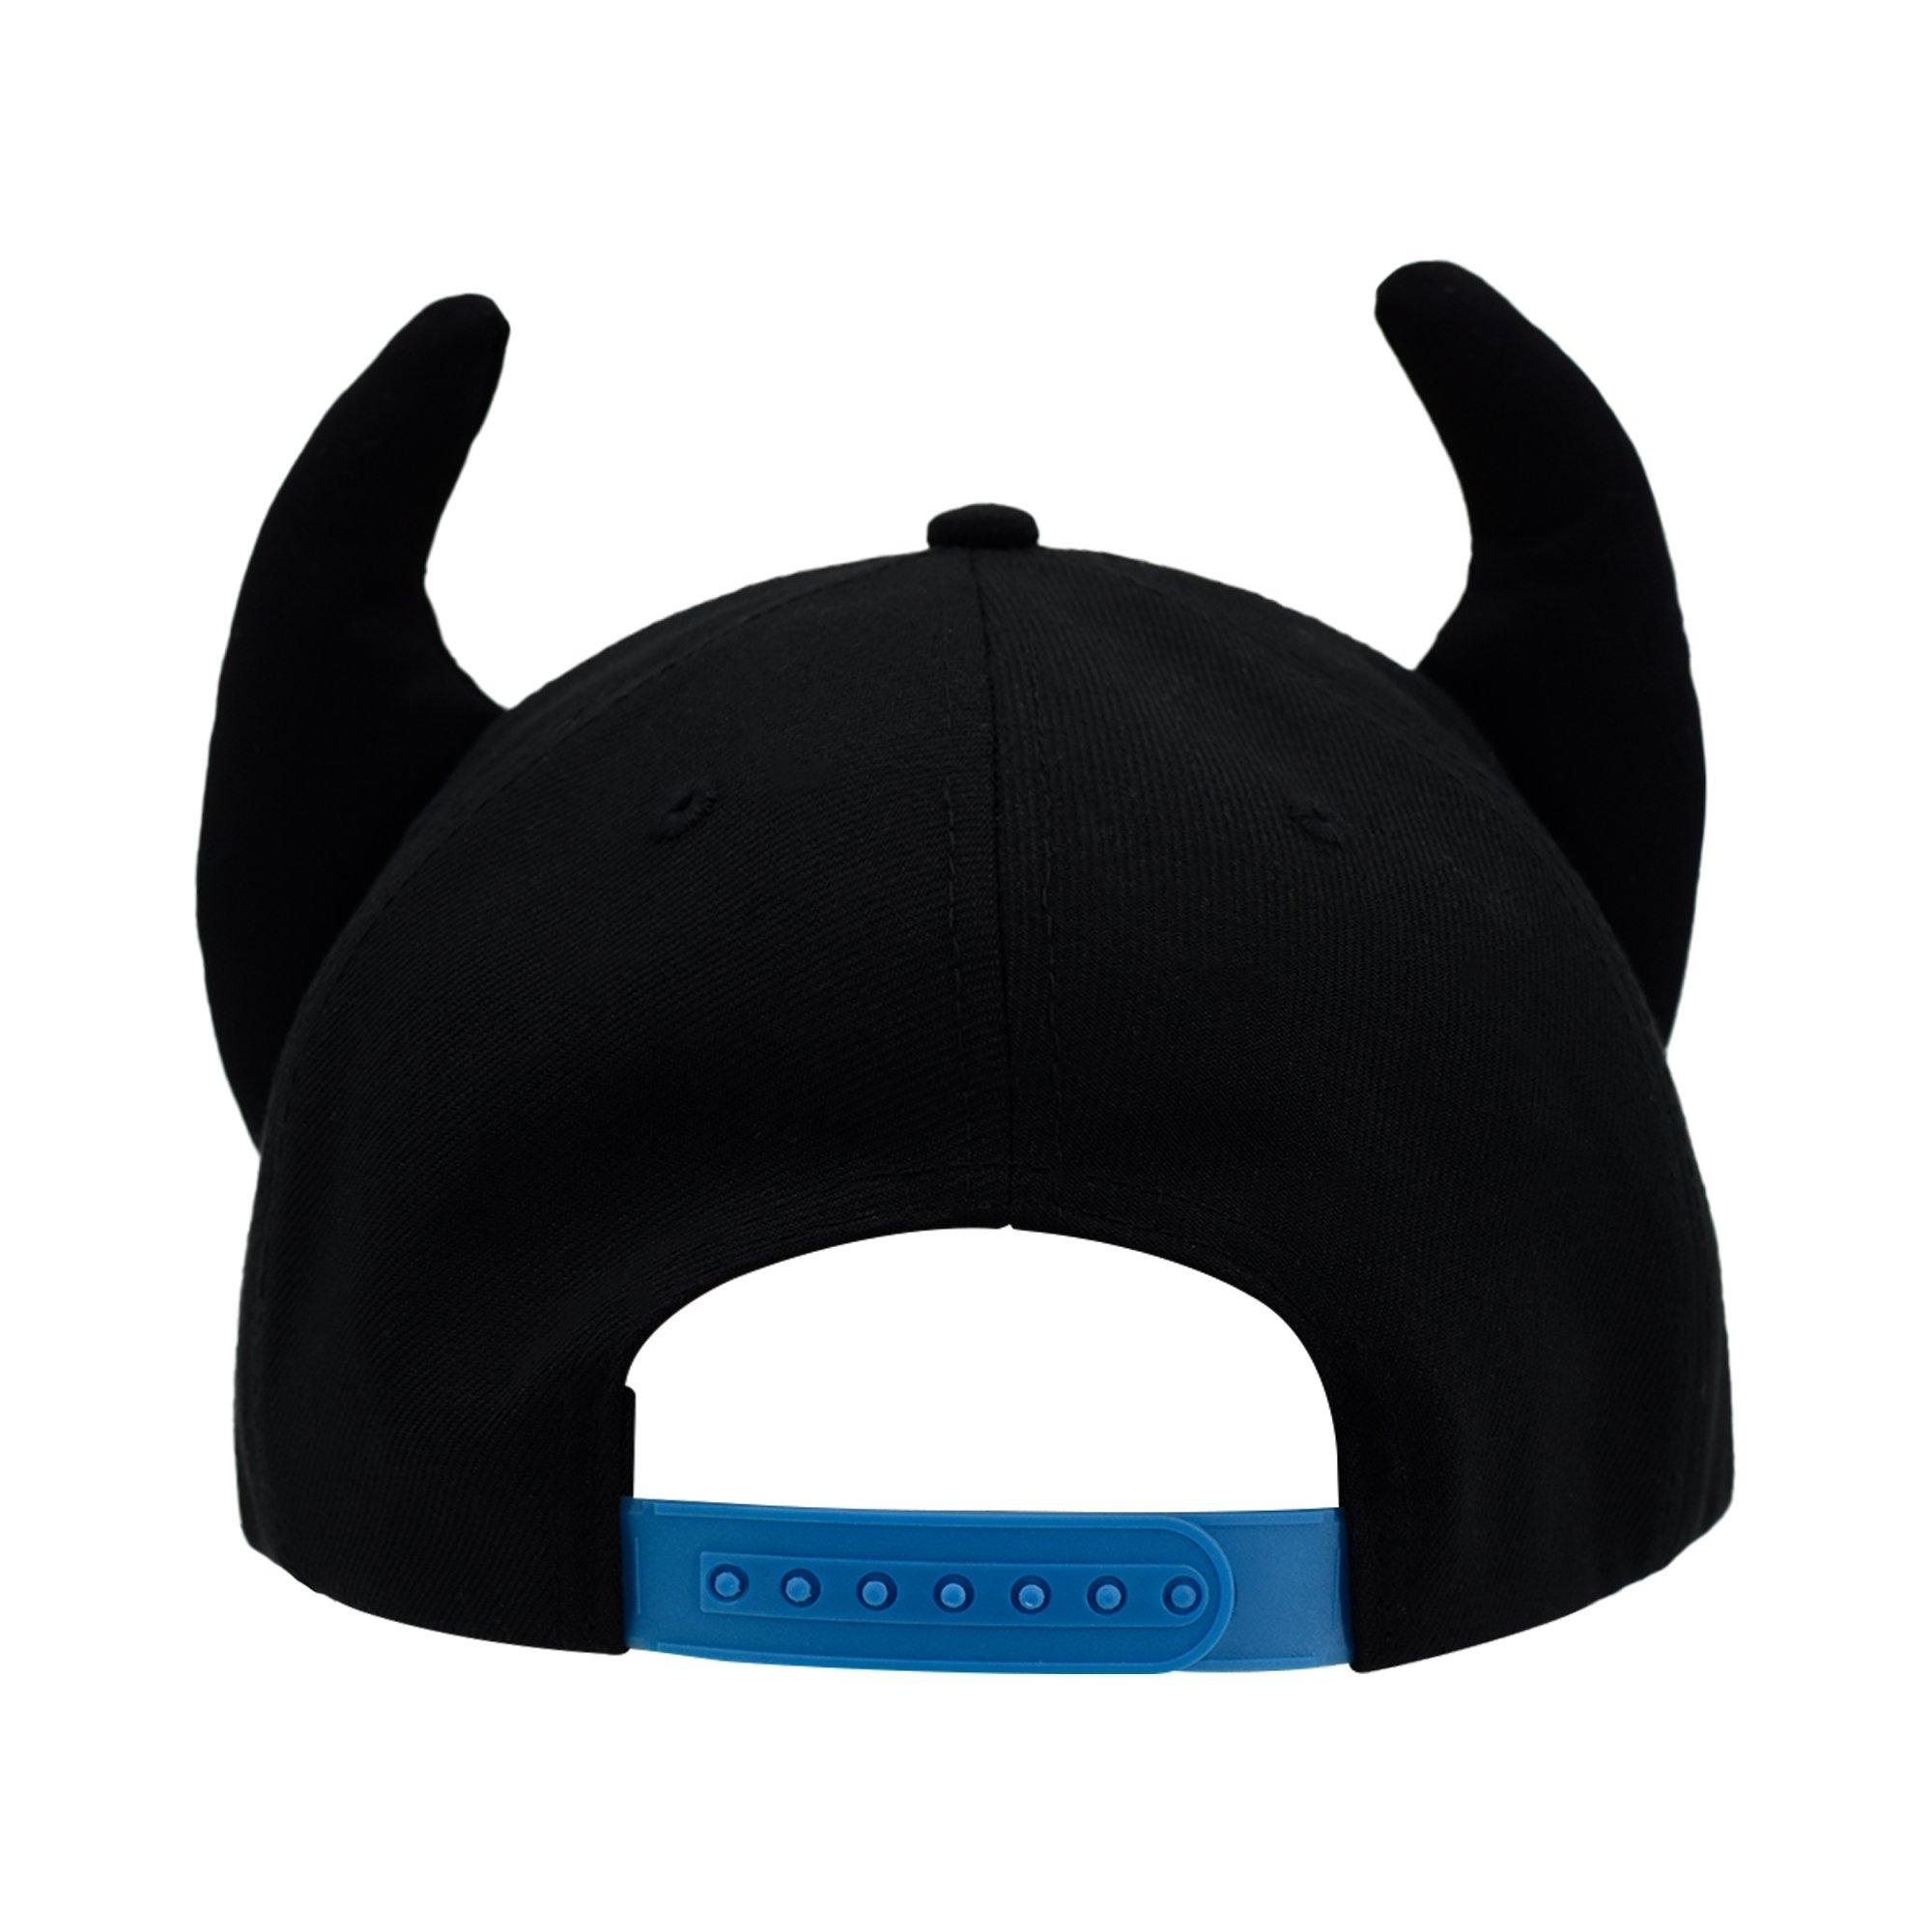 X-Men Wolverine Cosplay Snapback Hat with 3D Ears